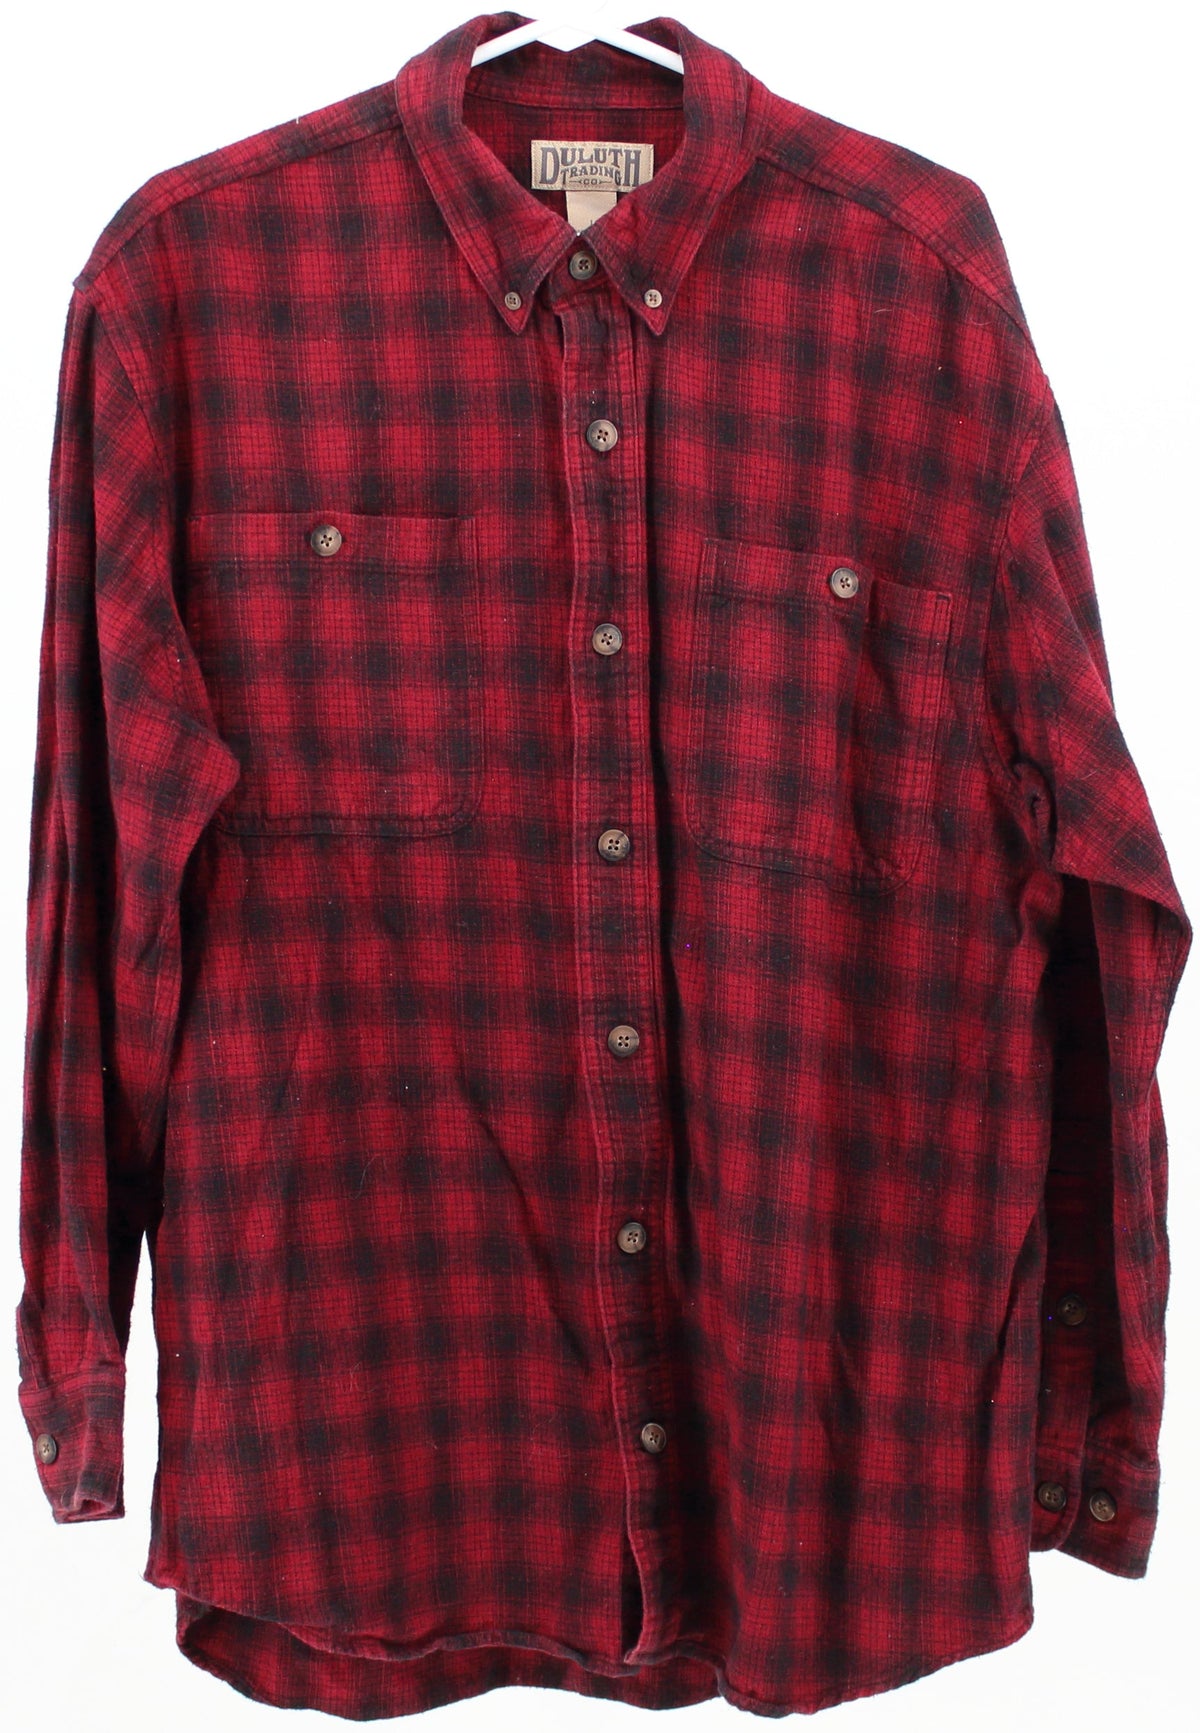 Duluth Trading Co Red and Black Plaid Flannel Shirt